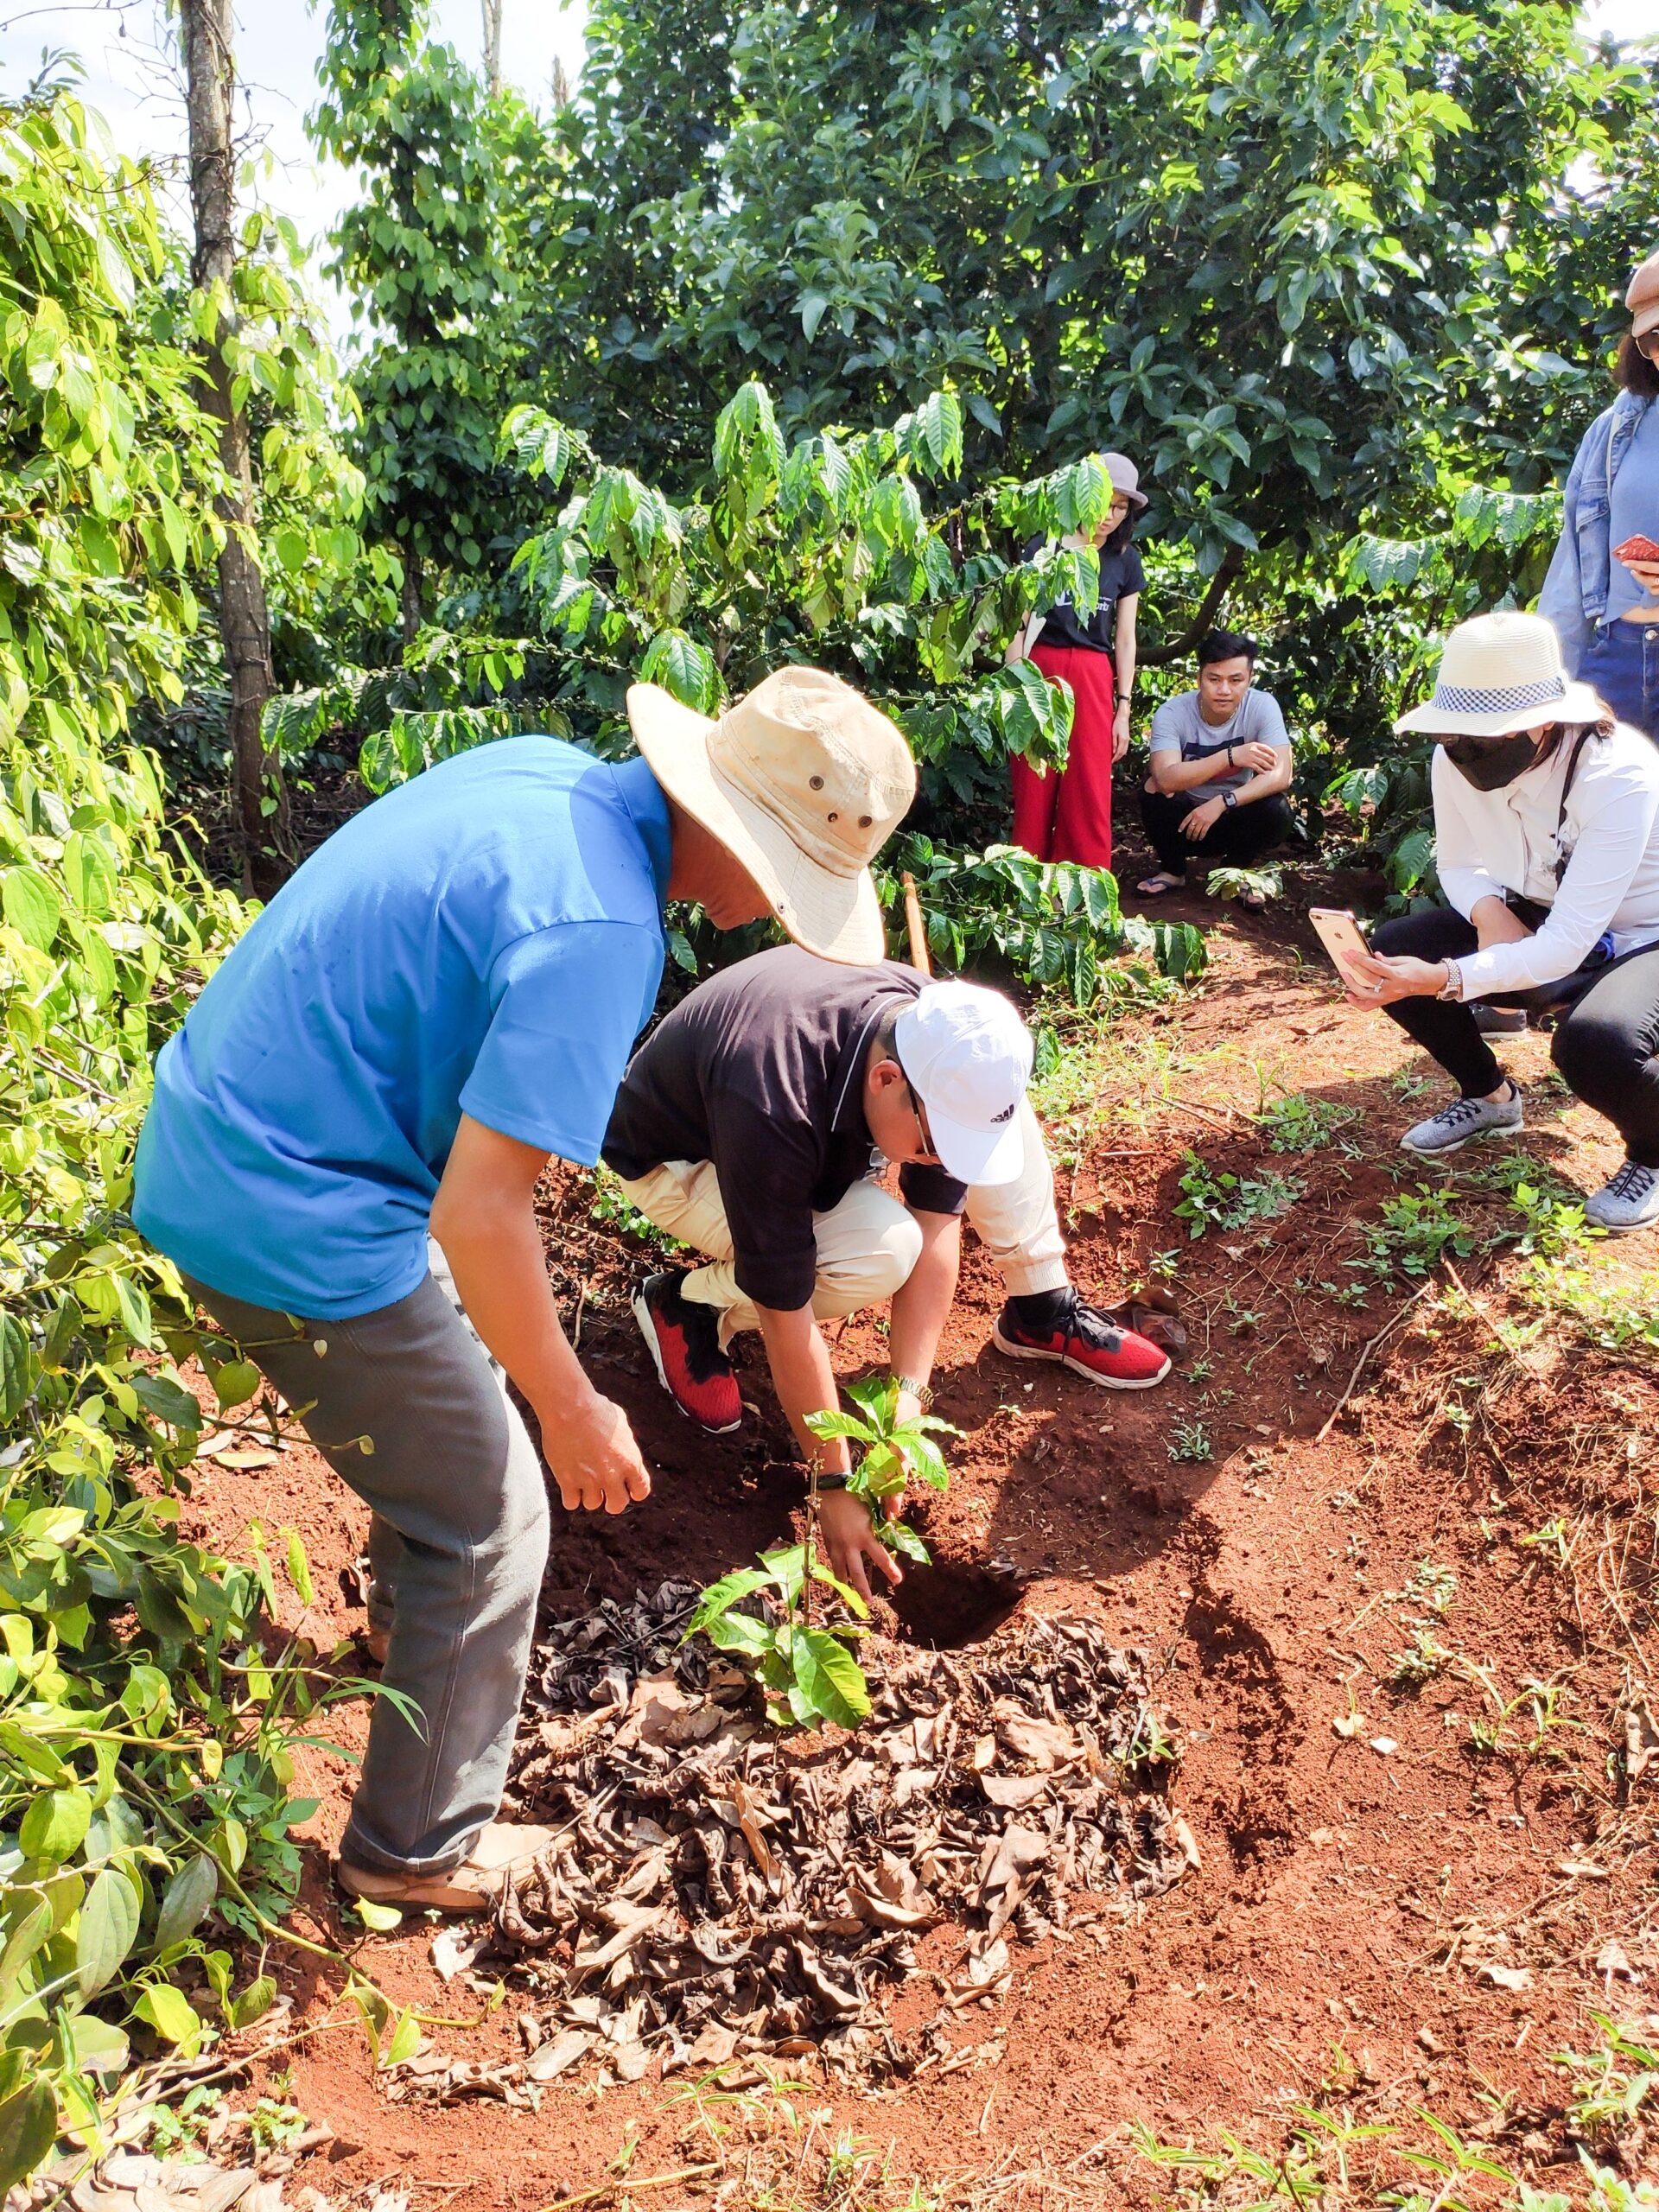 We tried our hand at planting a coffee tree